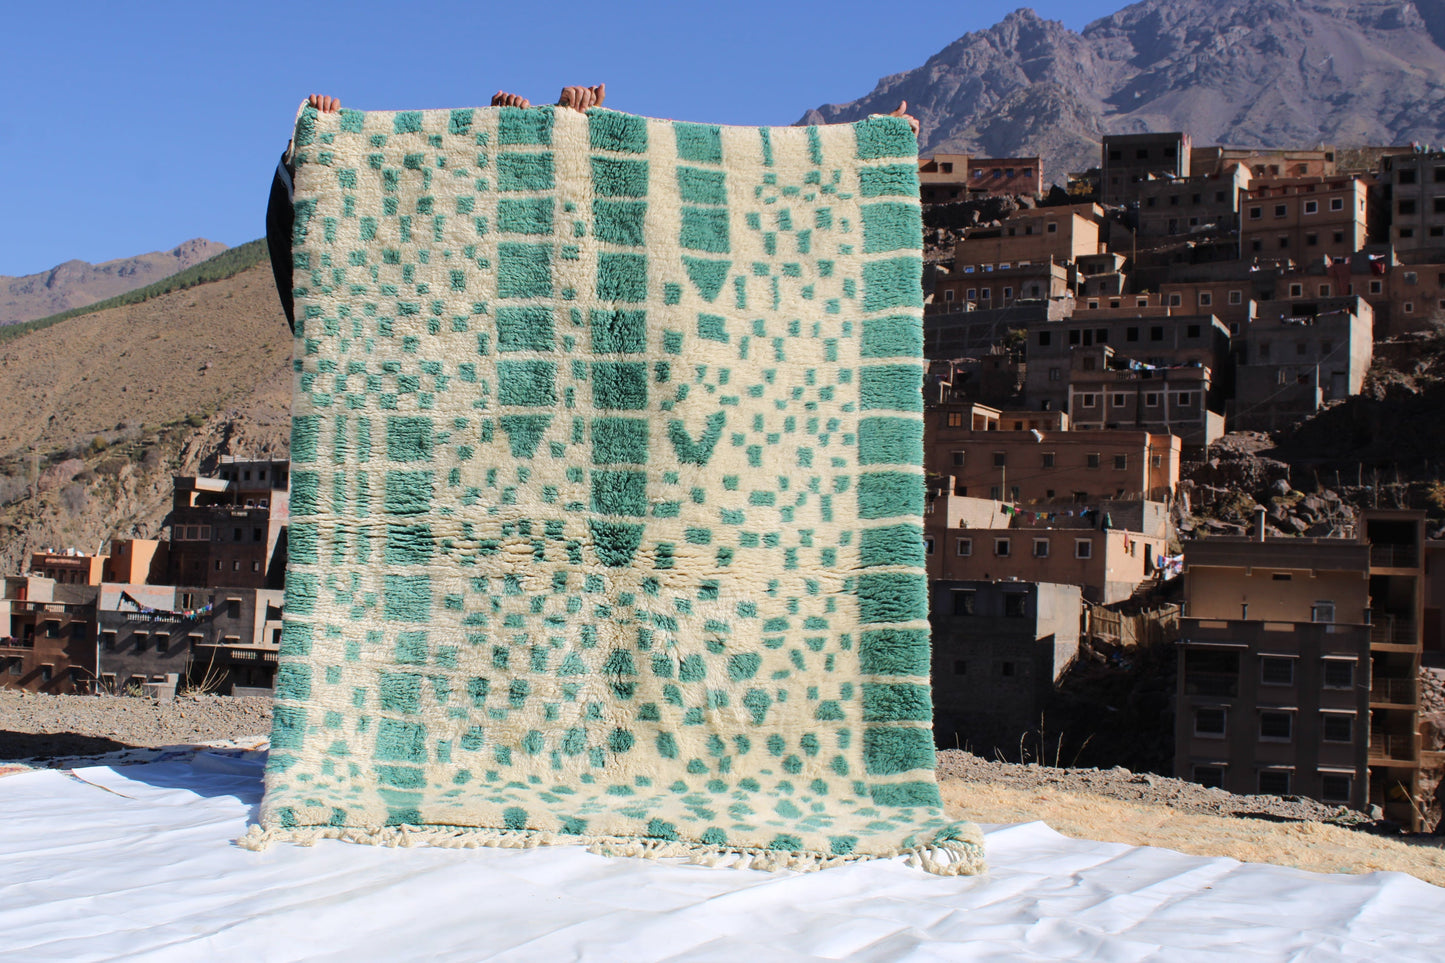 Beni Ourain rugs originate from the Atlas Mountains of Morocco and are characterized by their distinctive, neutral-toned, and geometric designs. These handwoven rugs often feature a plush pile and are made by the Berber tribes,  size is 215x160 cm